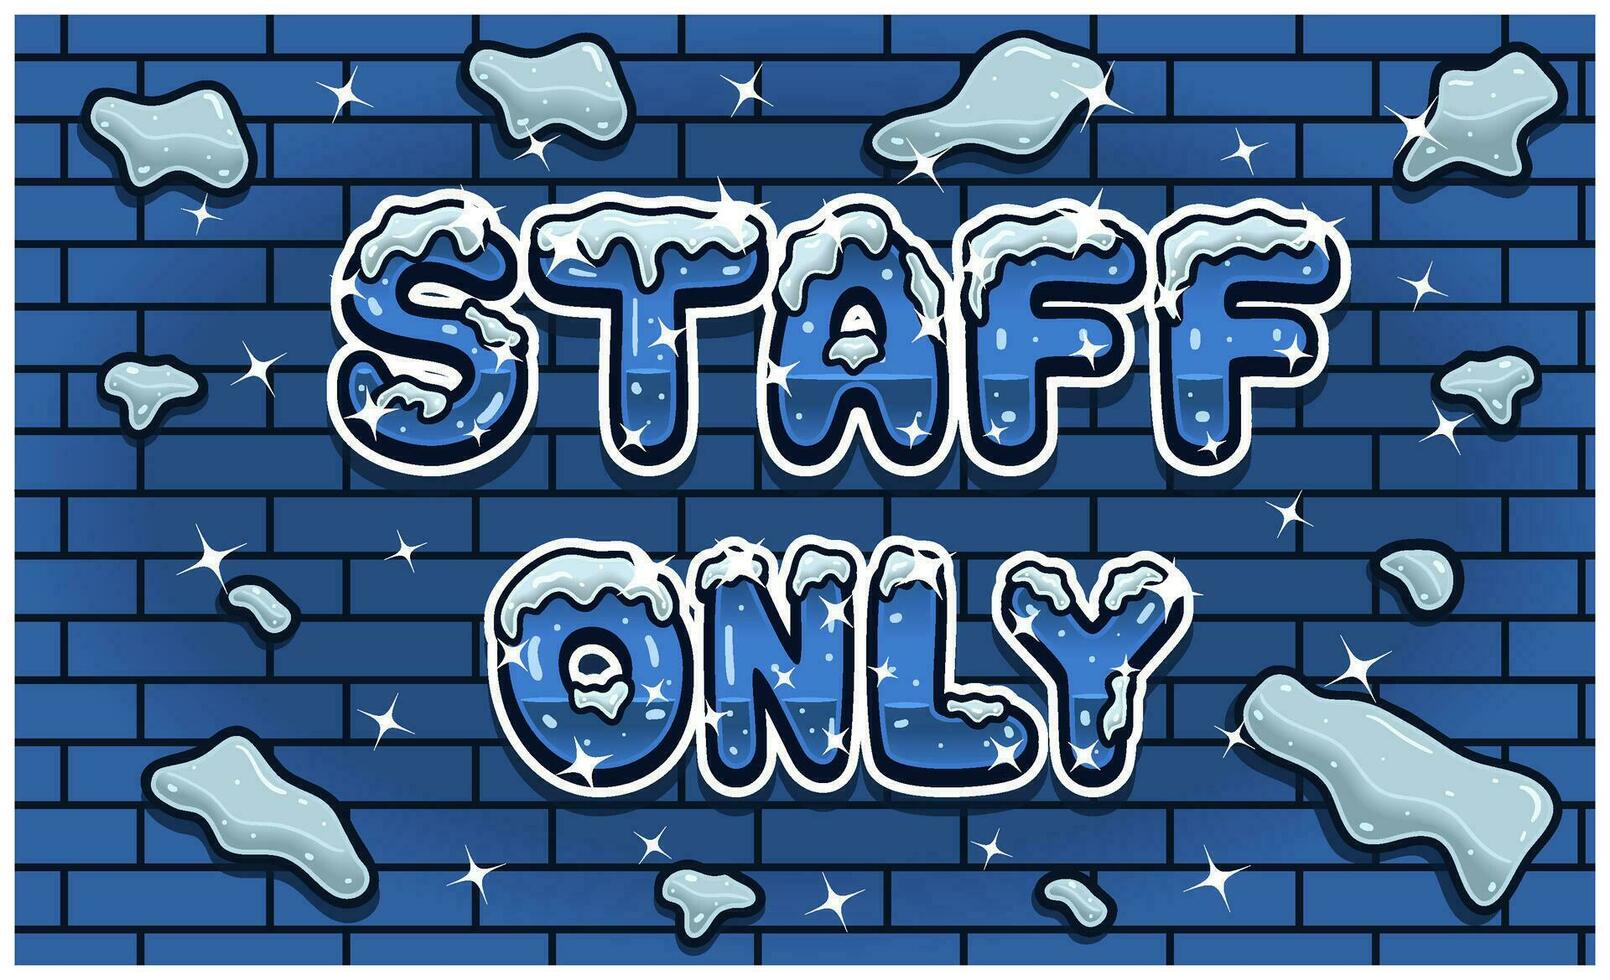 Staff Only Lettering With Snow Ice Font In Brick Wall Background For Sign Template. Text Effect and Simple Gradients. vector